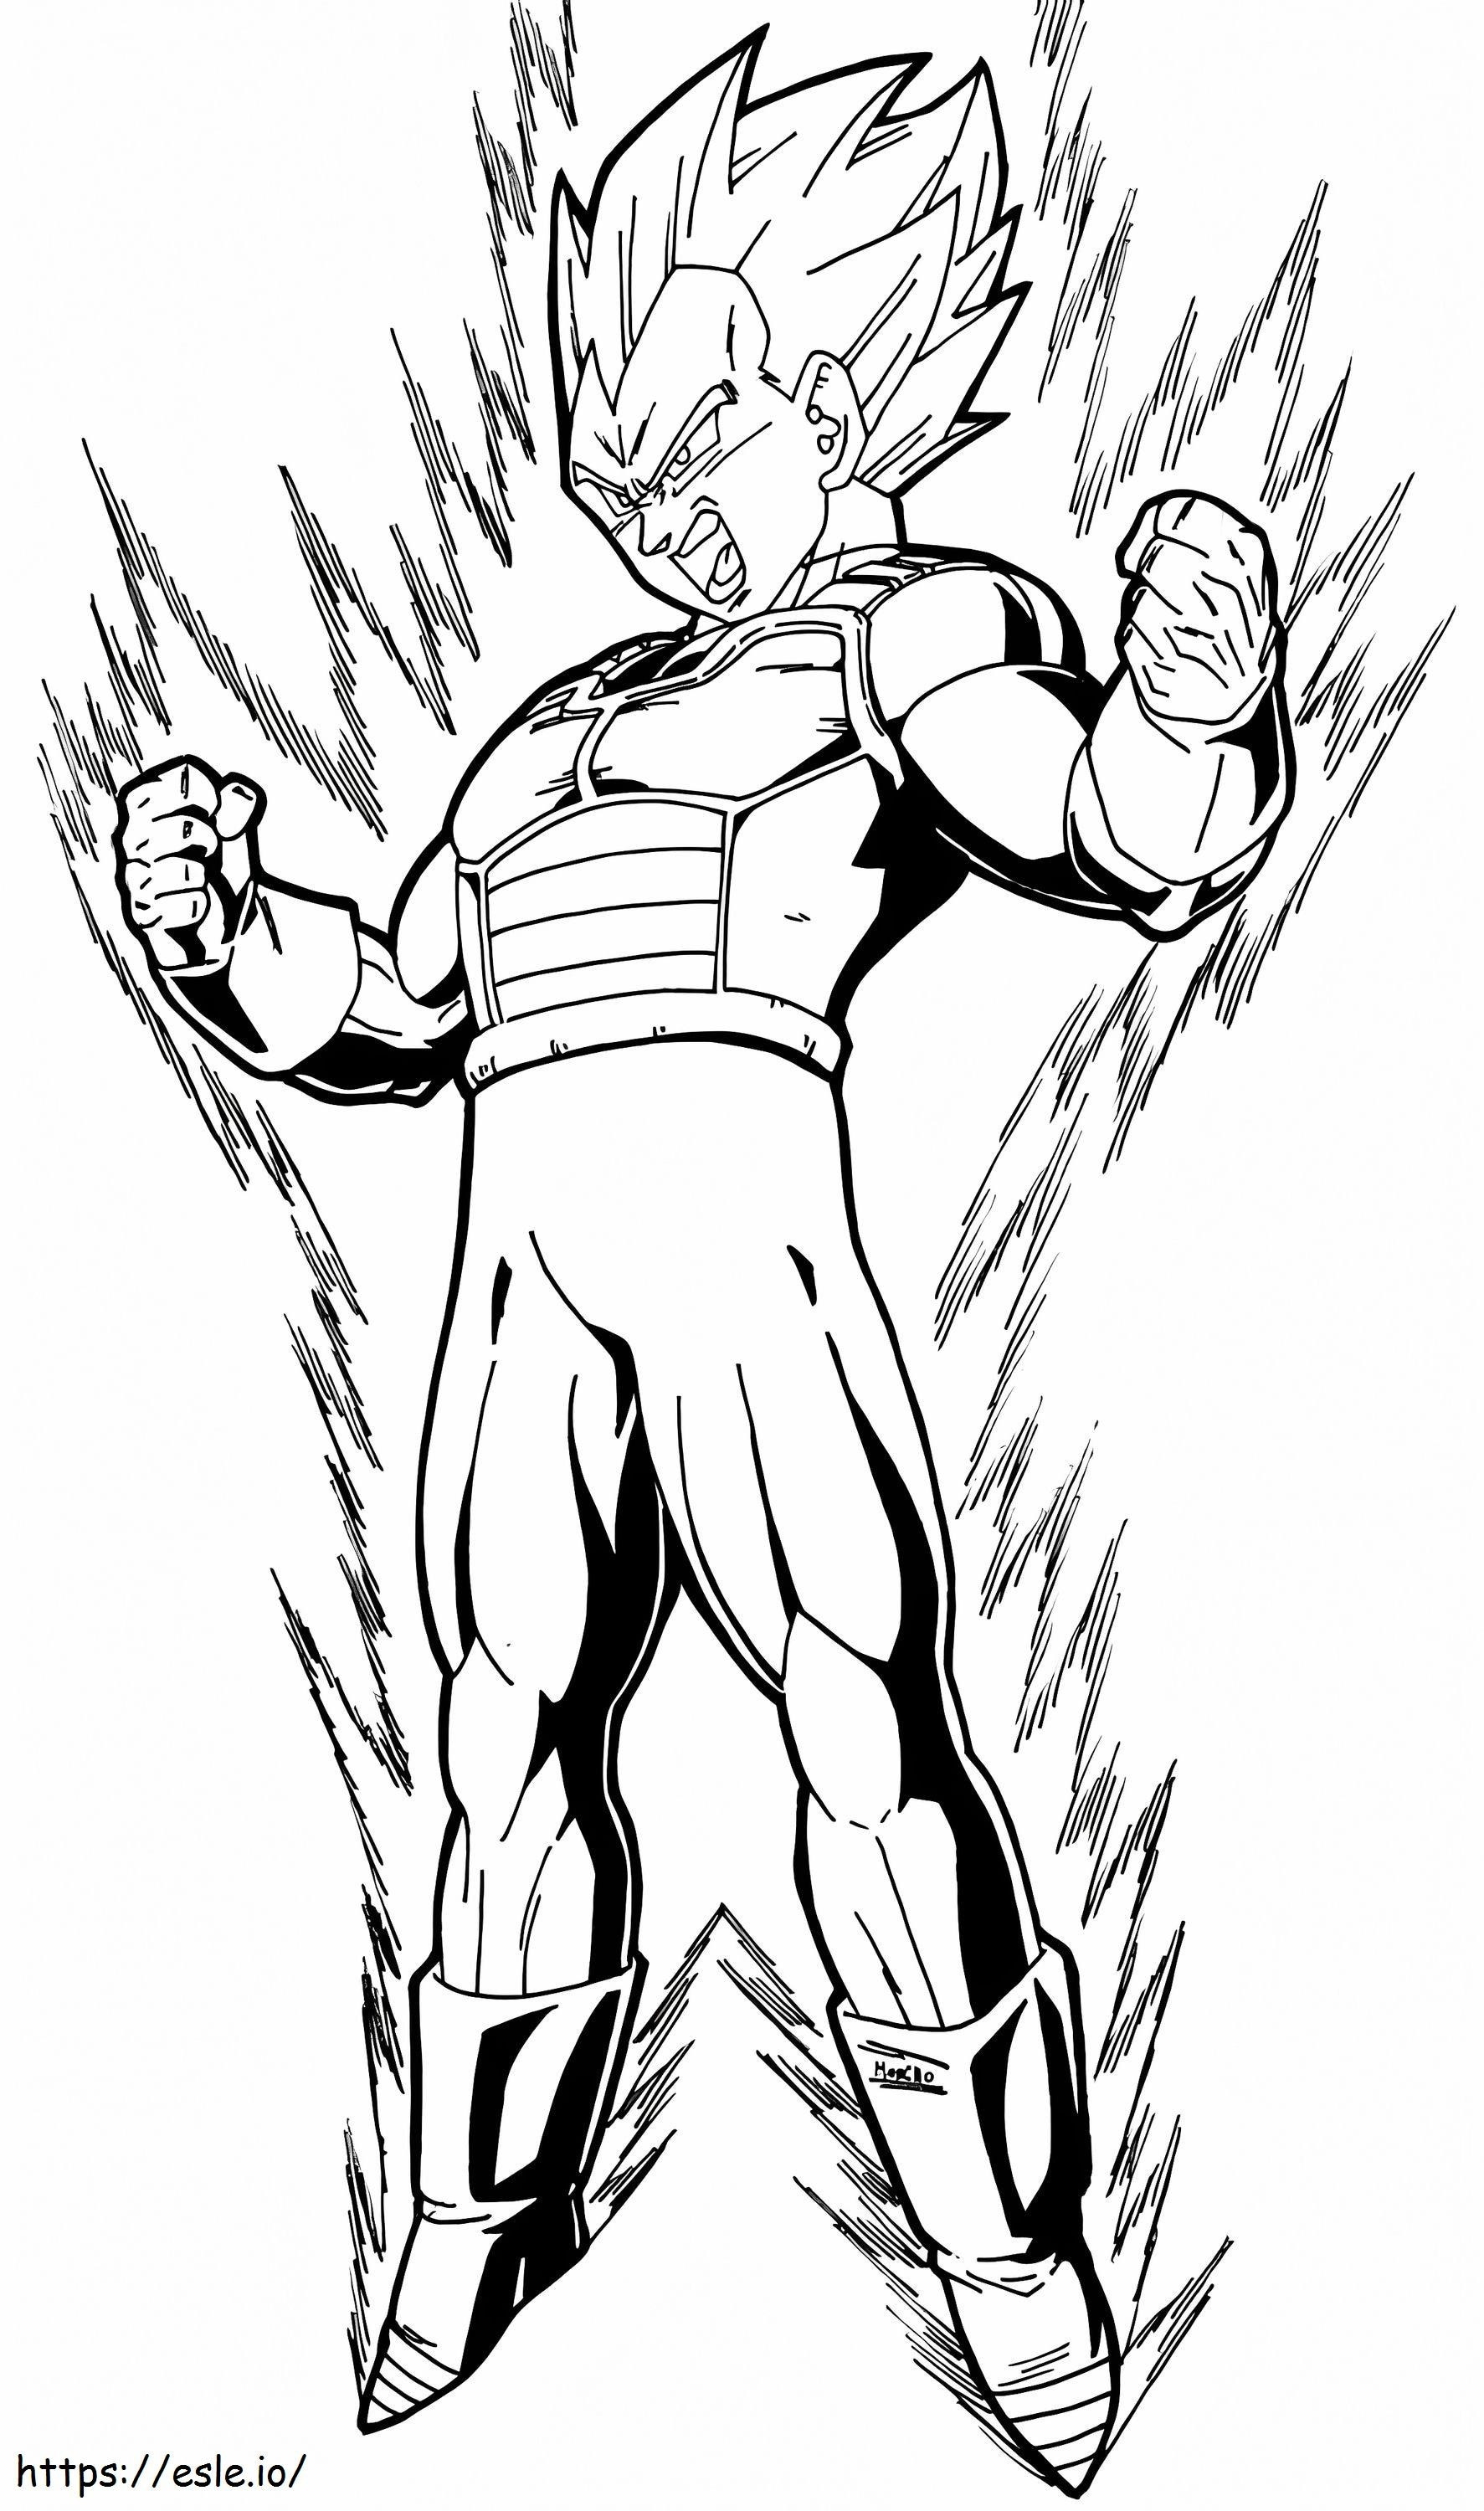 Super Vegeta Angry coloring page